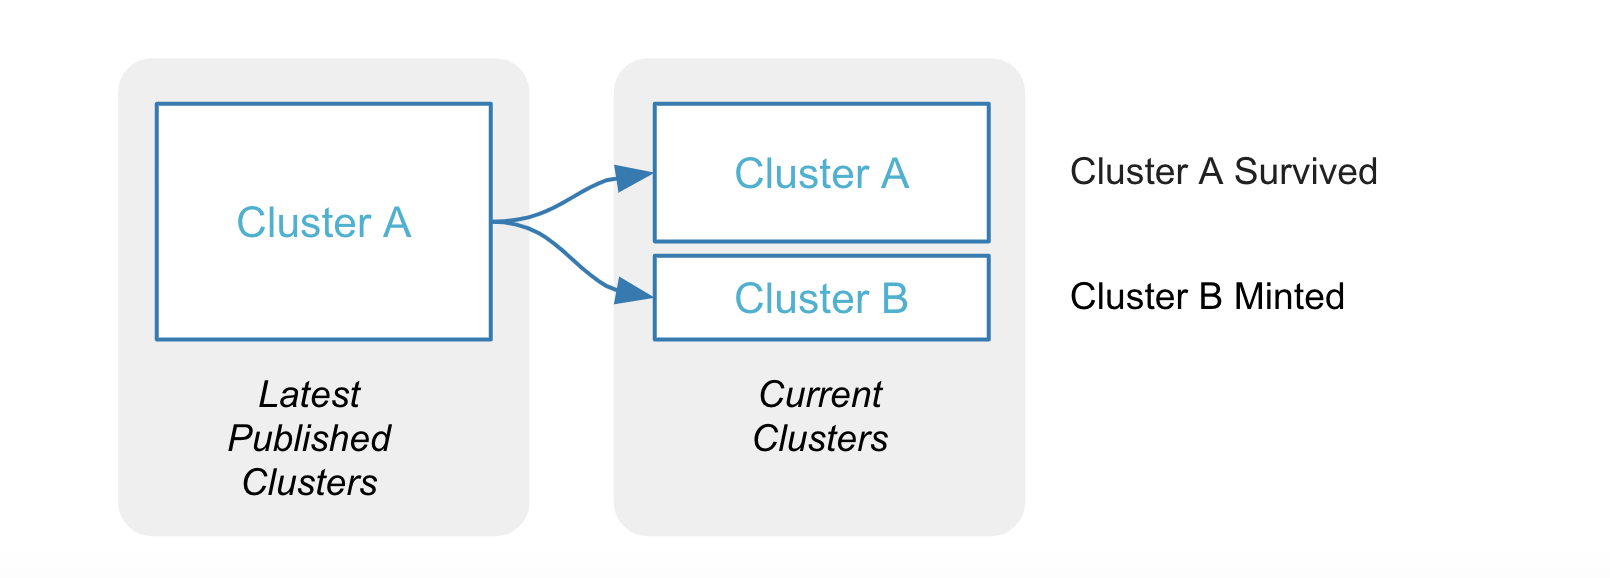 Cluster A splits into two clusters. One of the two current clusters keeps the ID A, while the other obtains the new ID B.